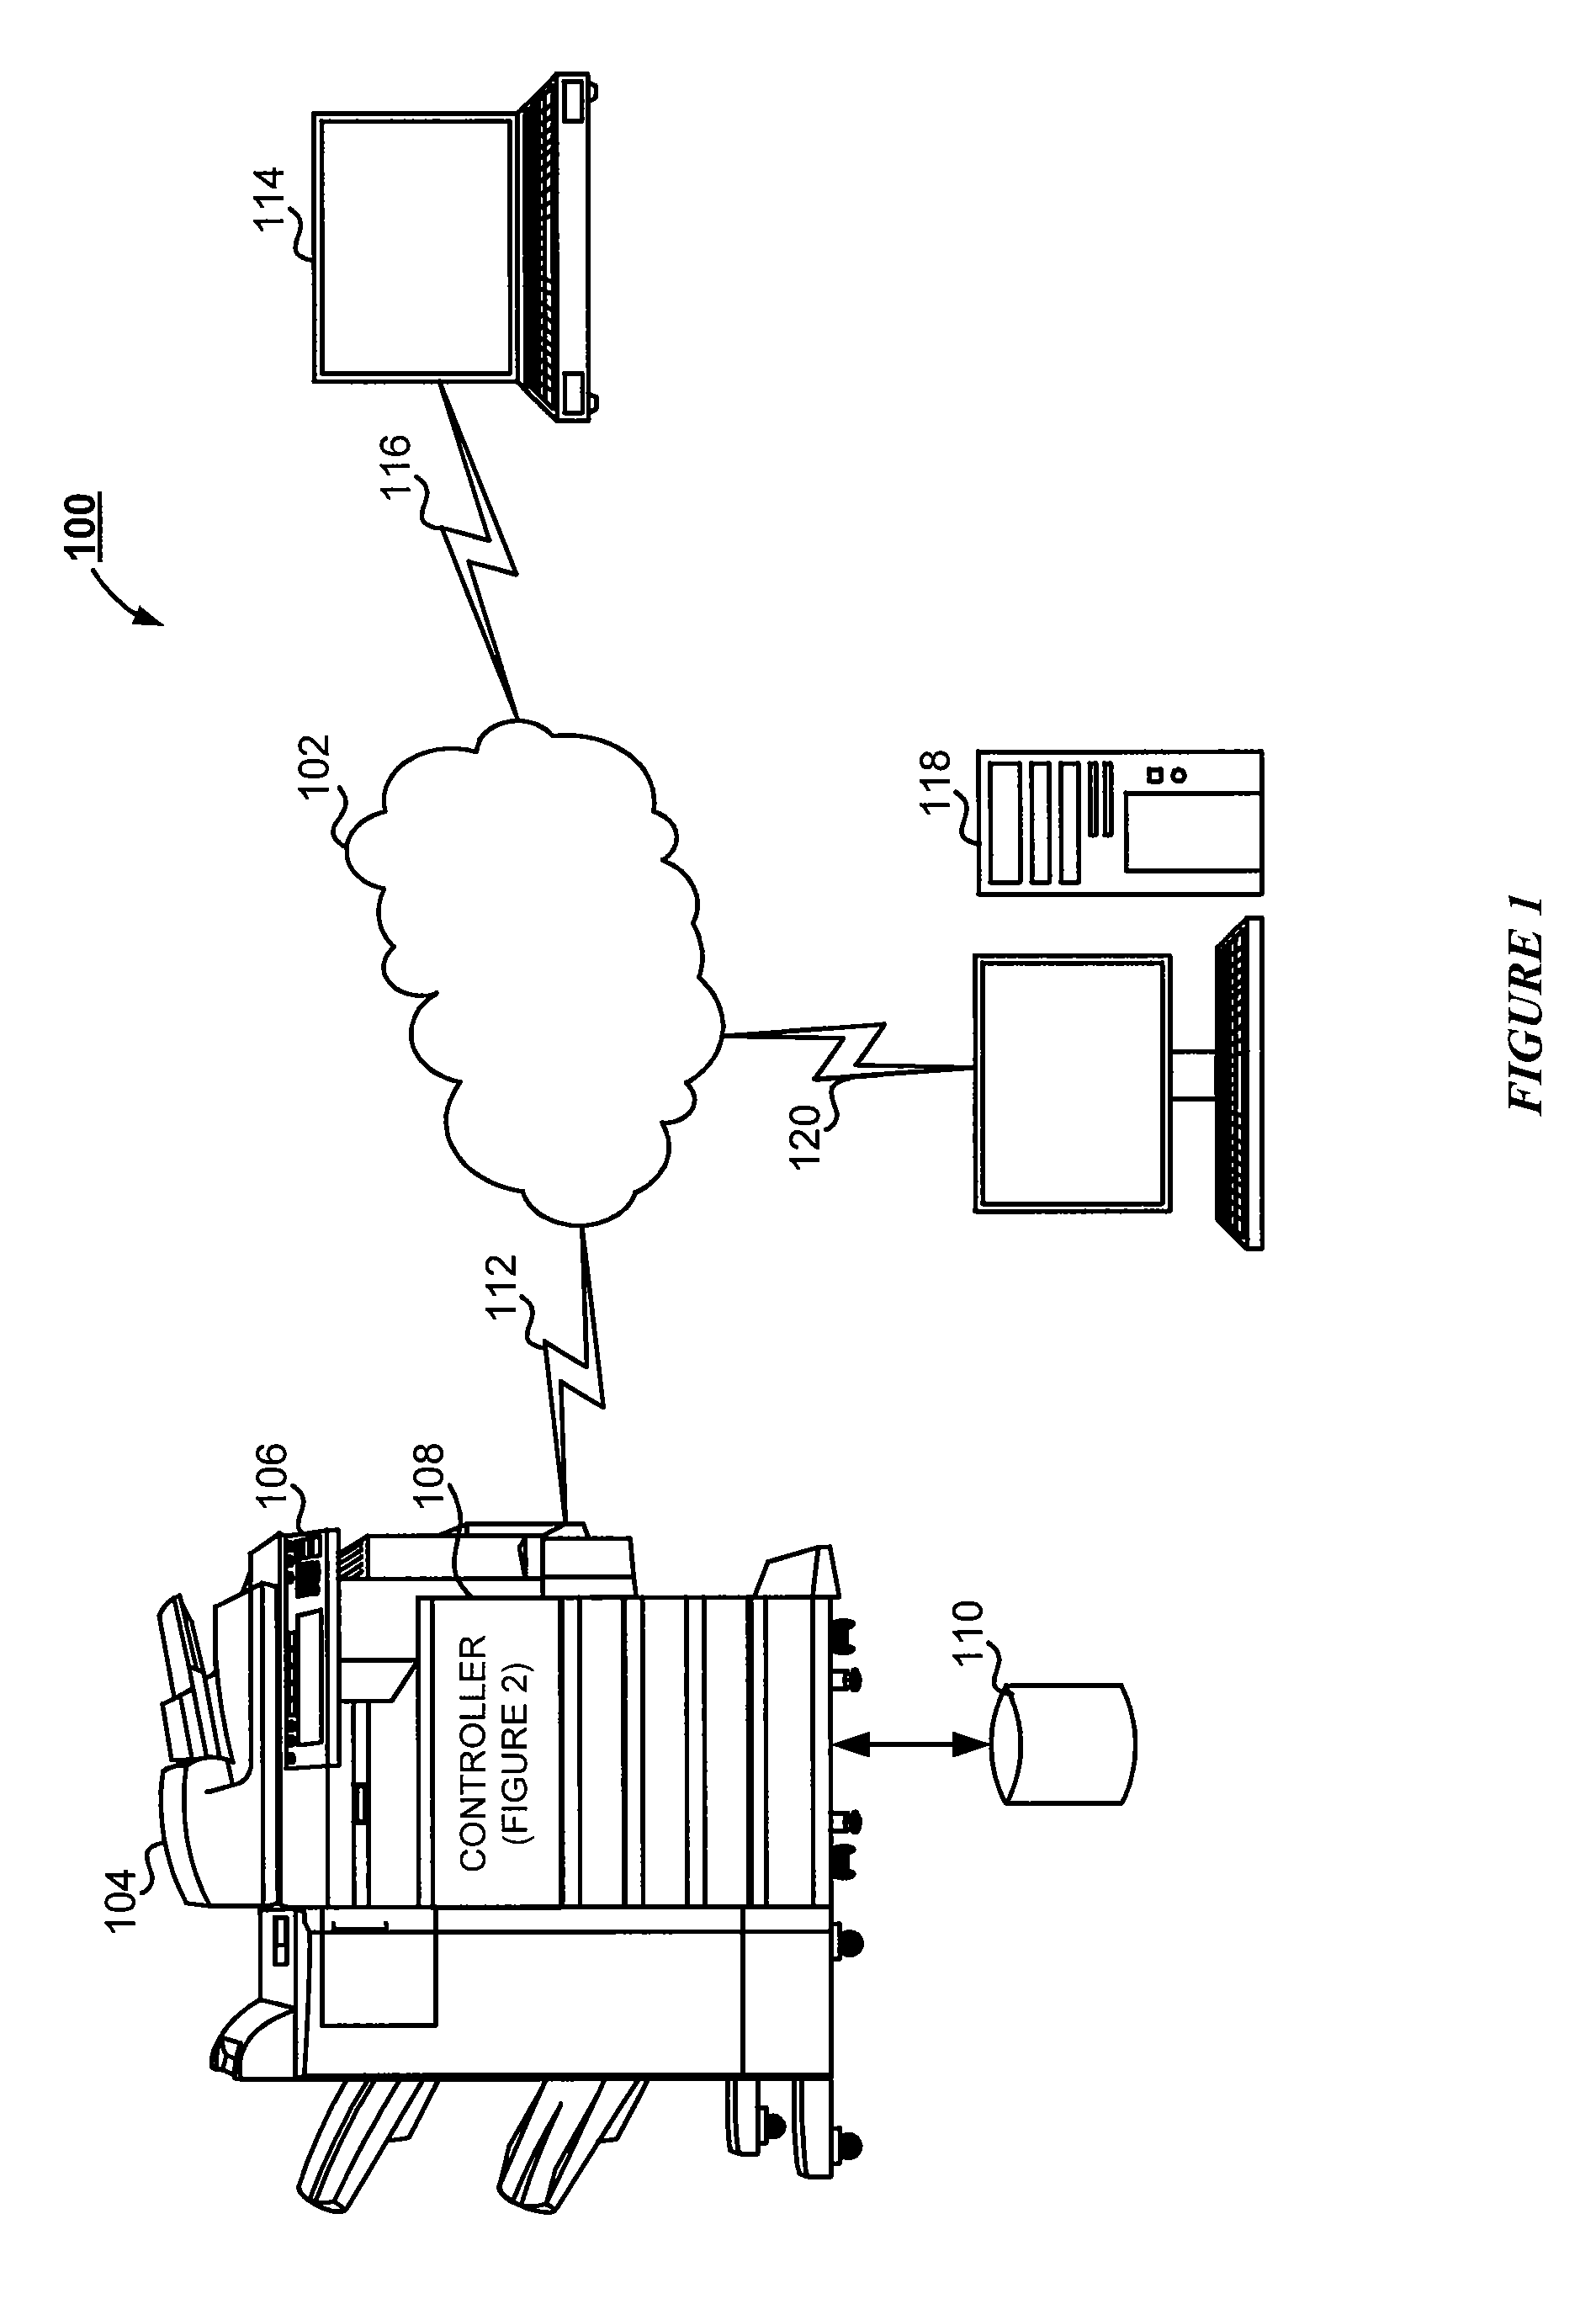 System and method for securing remote administrative access to a processing device